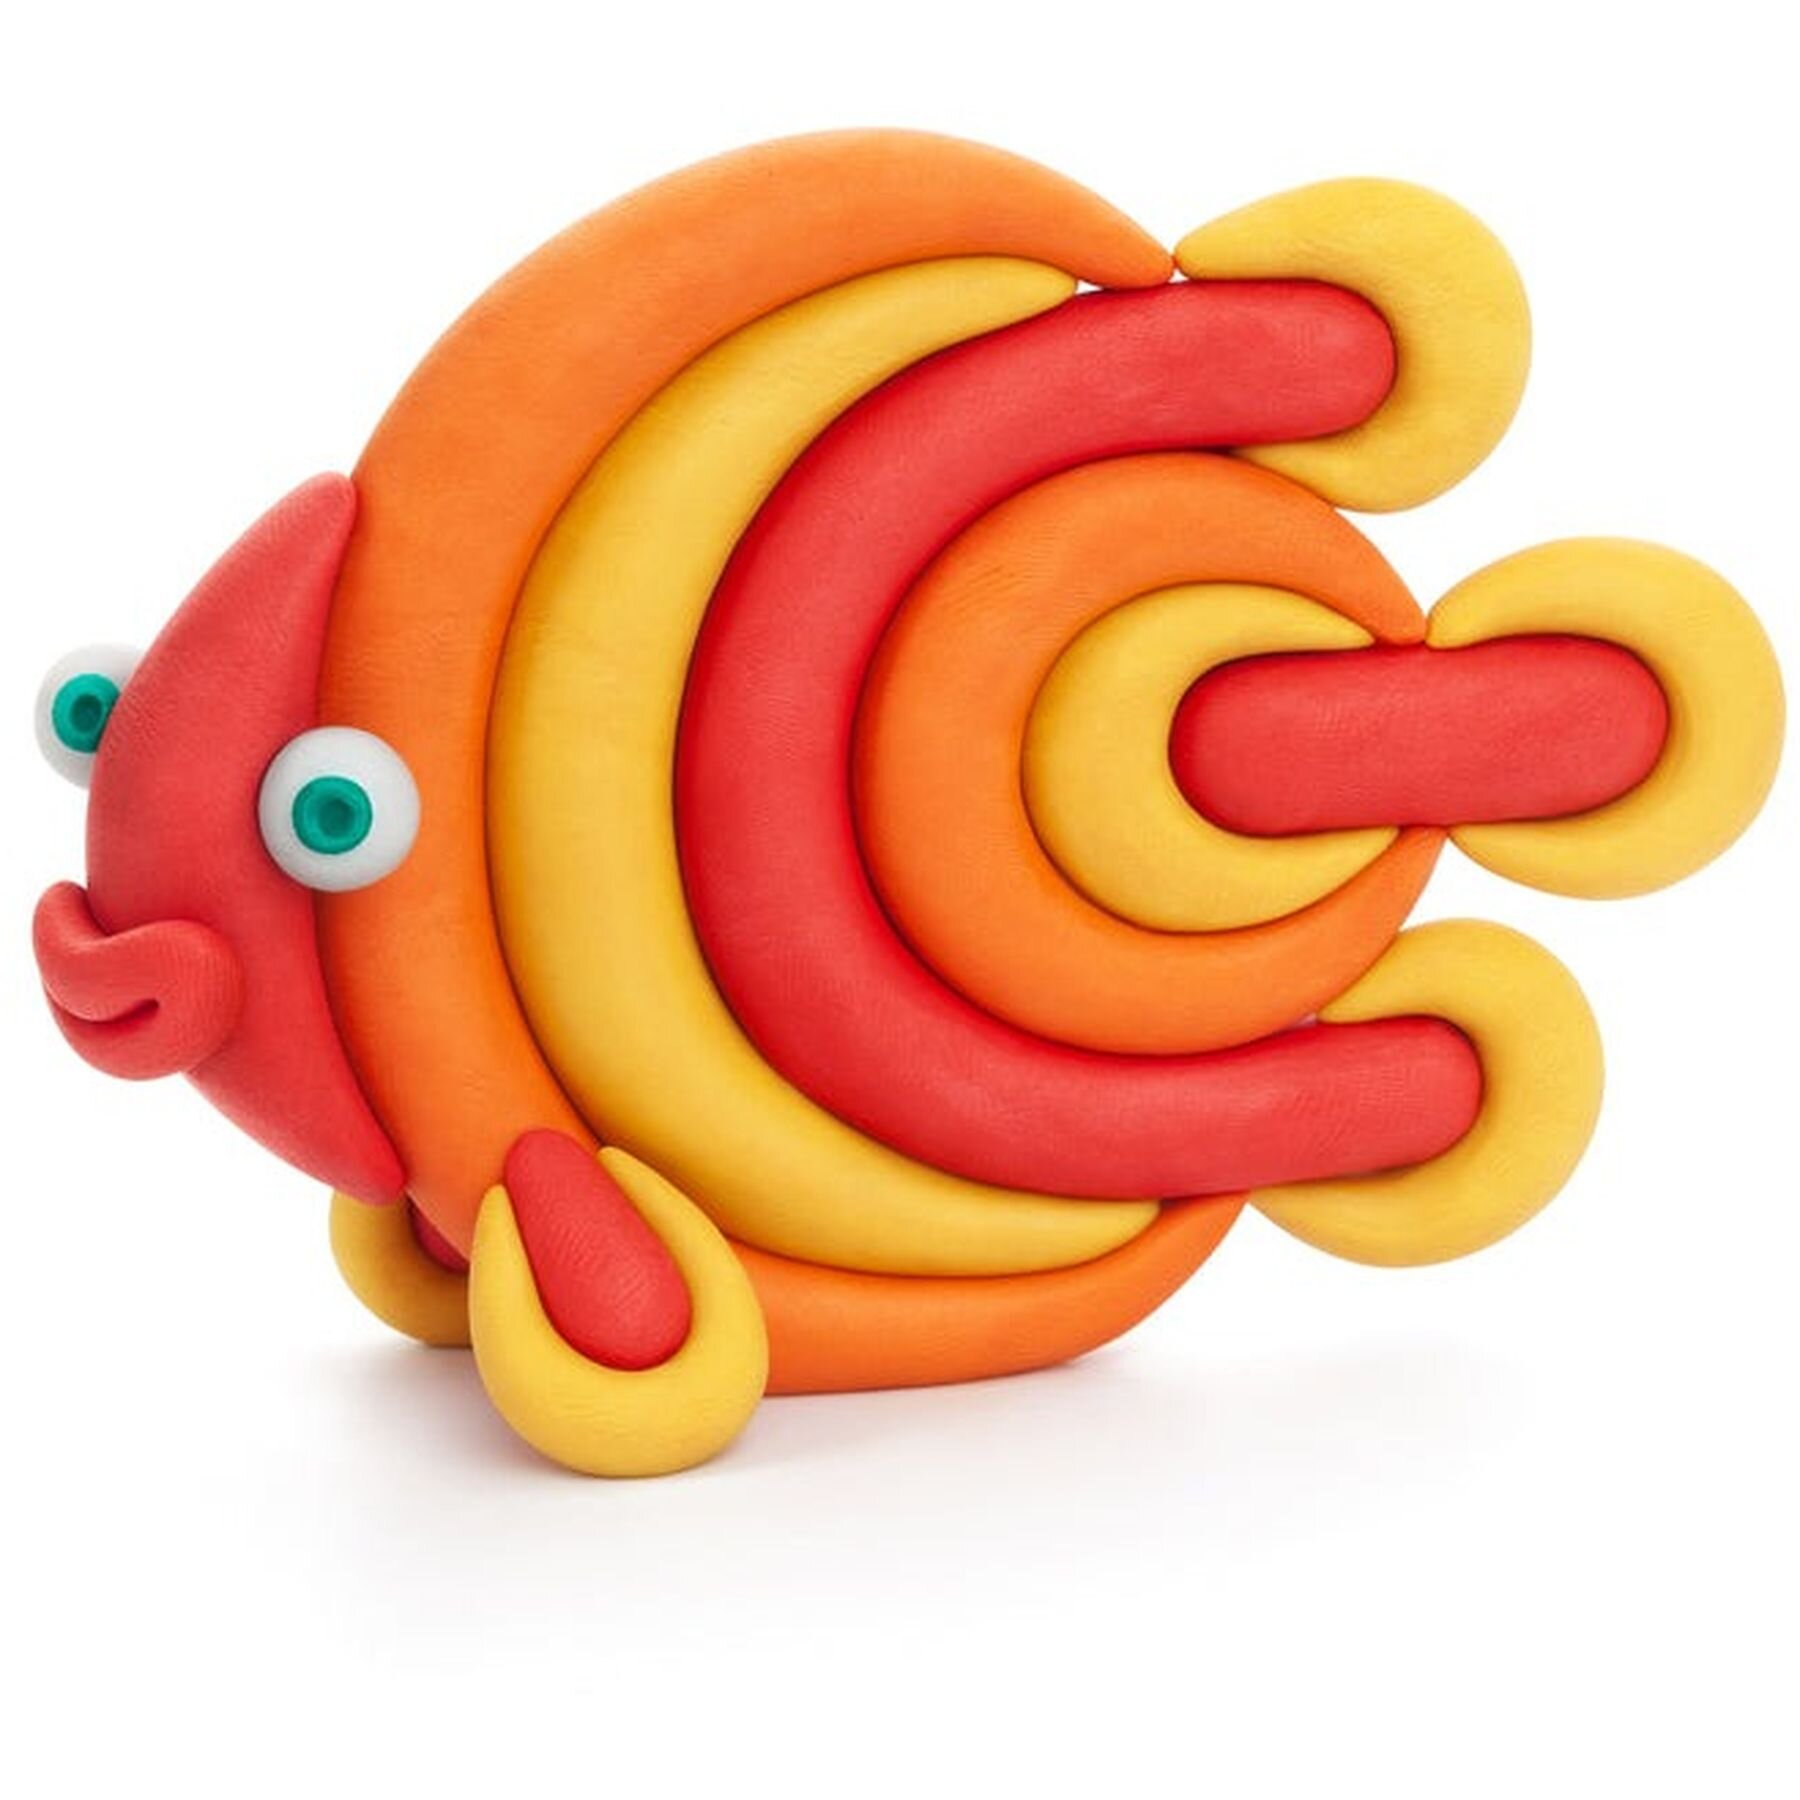 Hey Clay Ocean Set (Clownfish, Discus Fish, Eel) - 6 Cans - PLAY